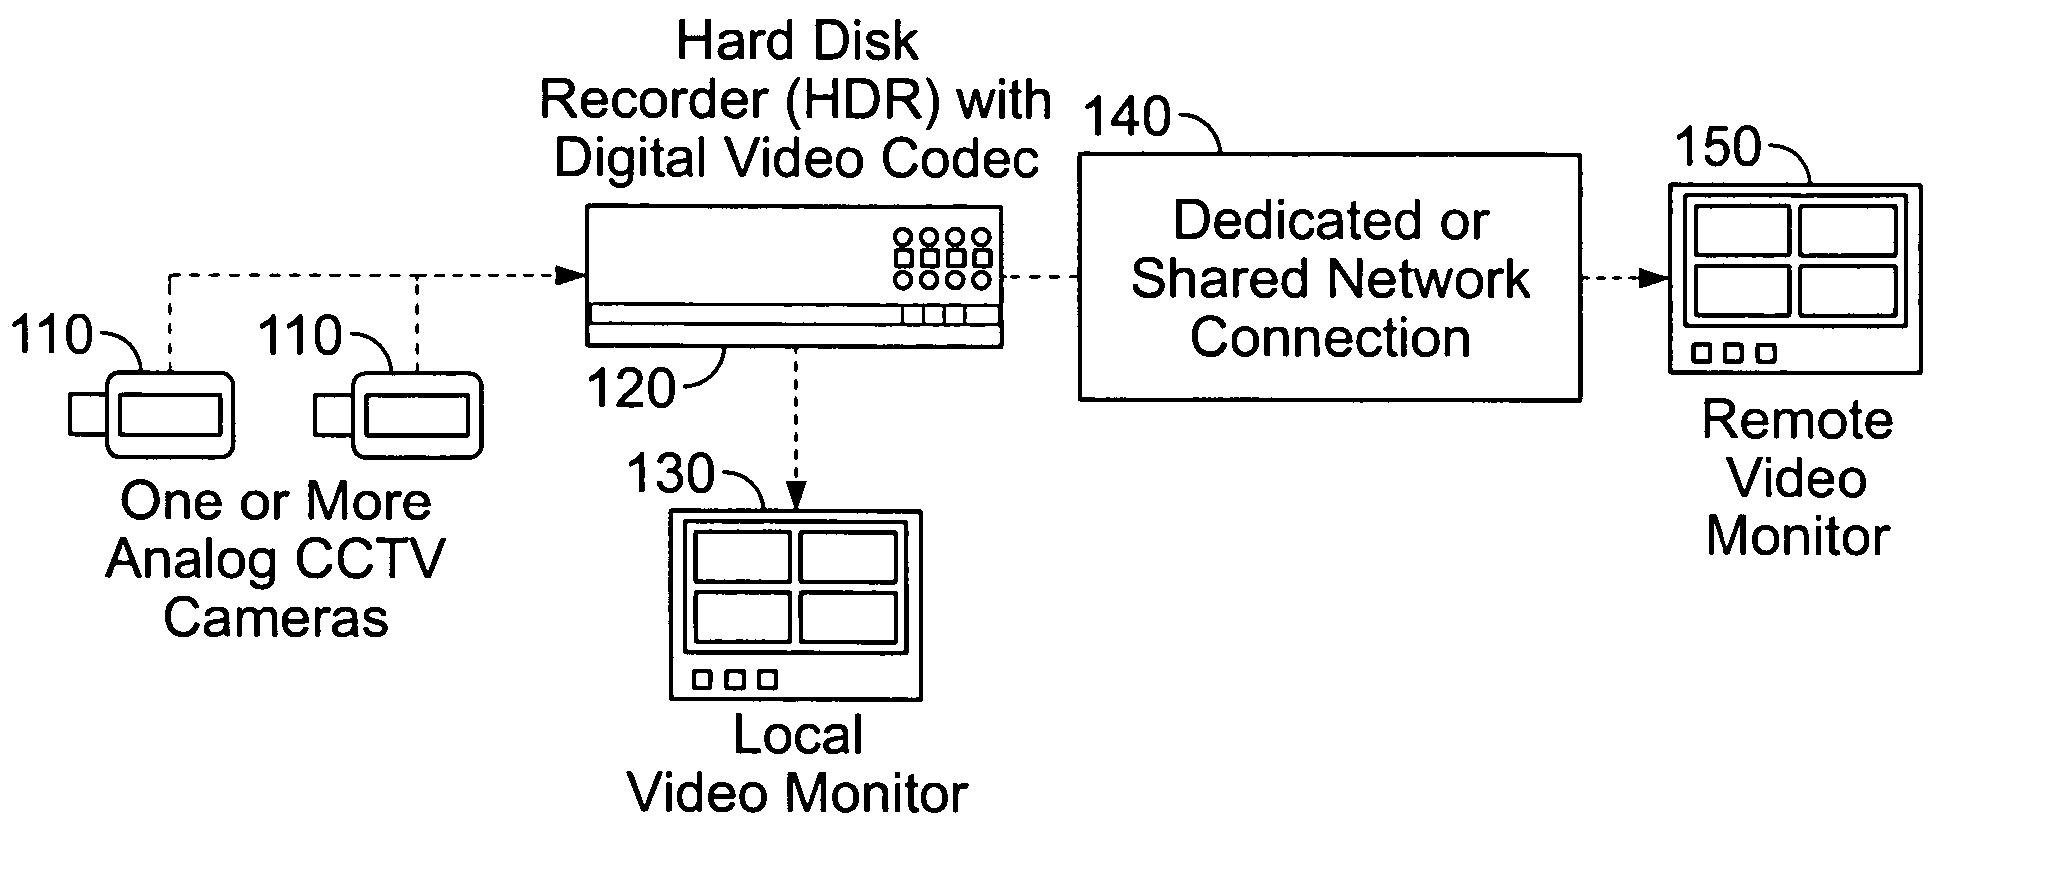 Video monitoring application, device architectures, and system architecture